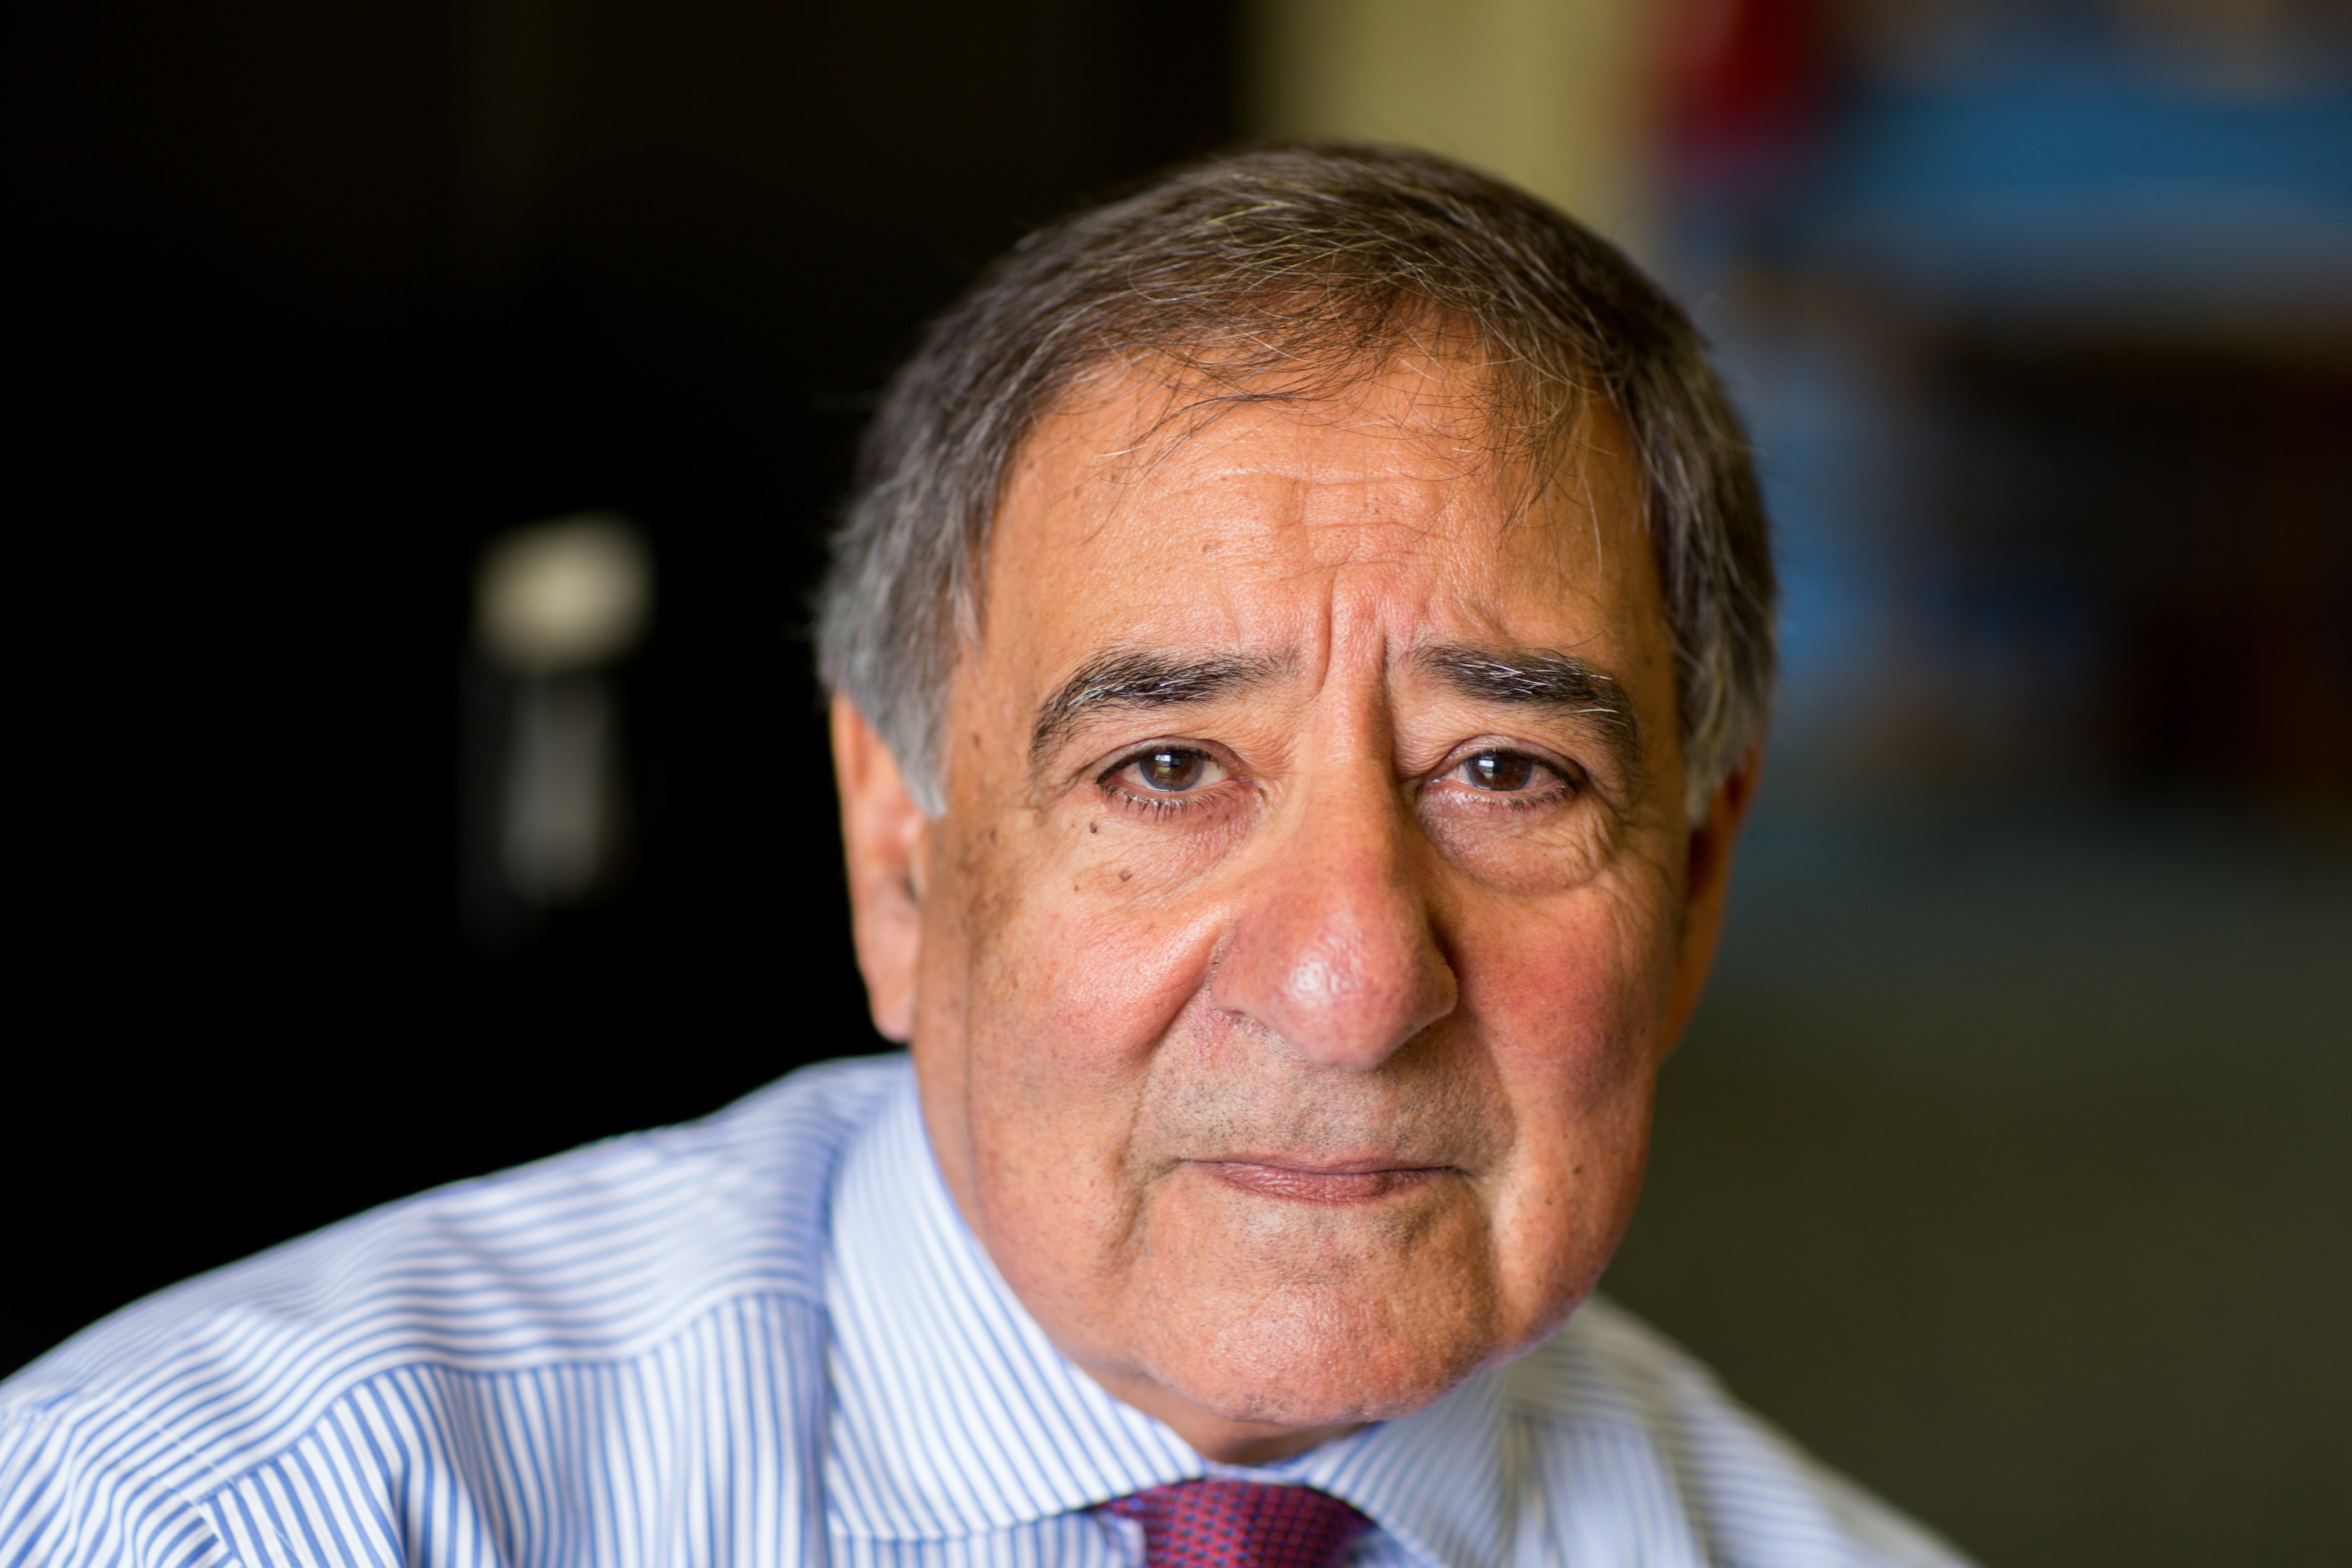 Leon Panetta at the Panetta Institute in Seaside, CA on July 31, 2015. (David Hume Kennerly—Getty Images)